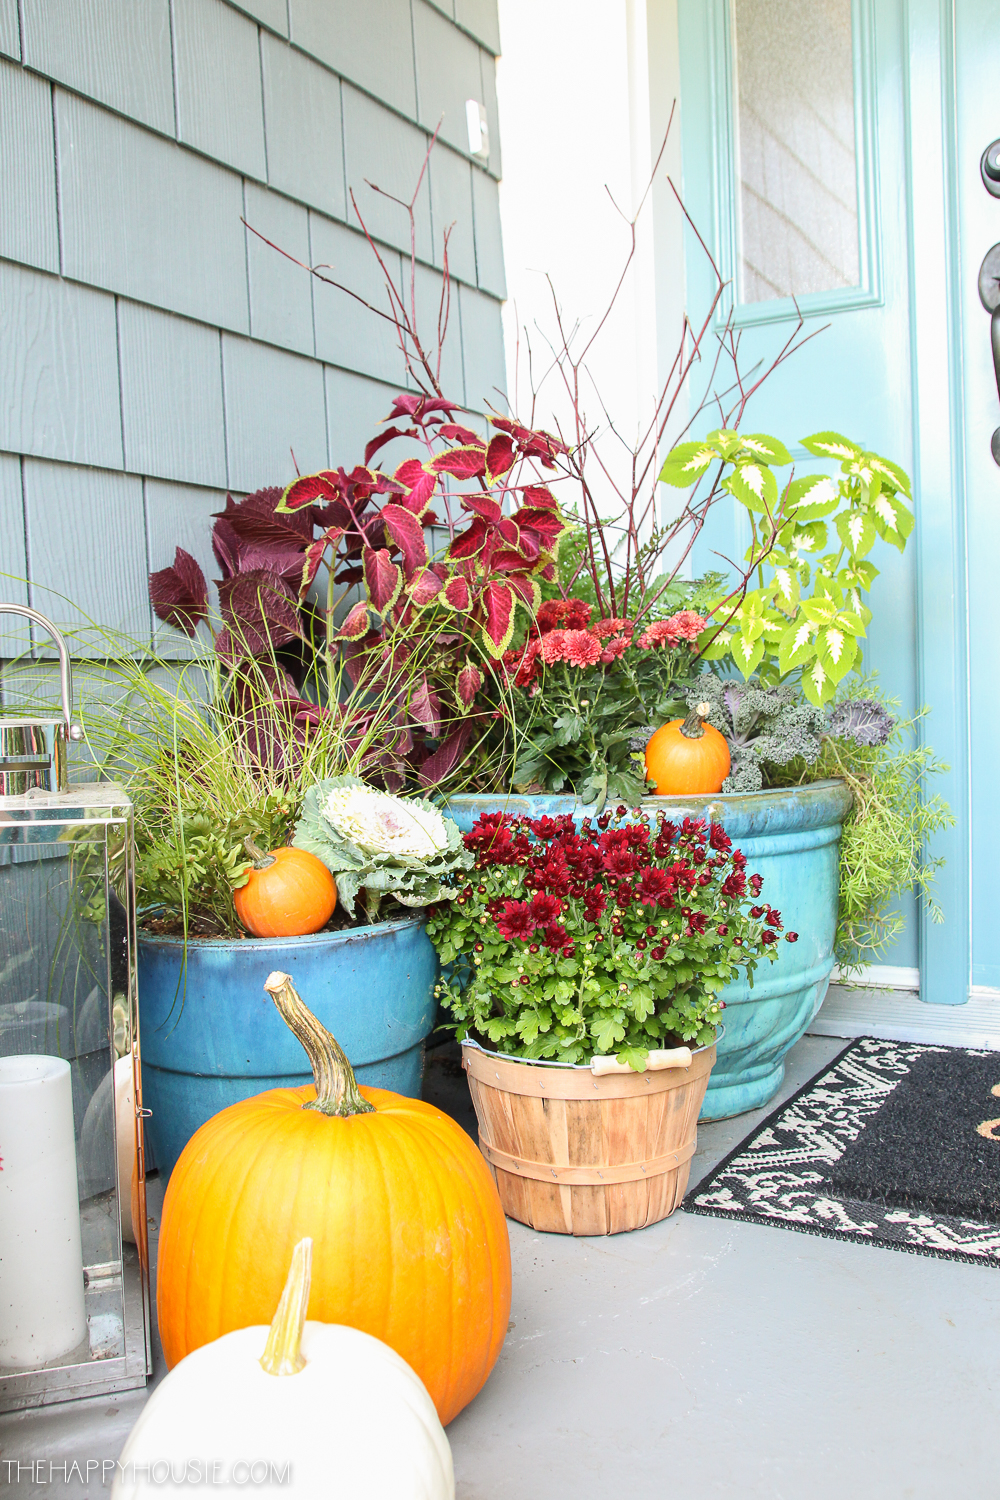 Pumpkins and planters on the porch.